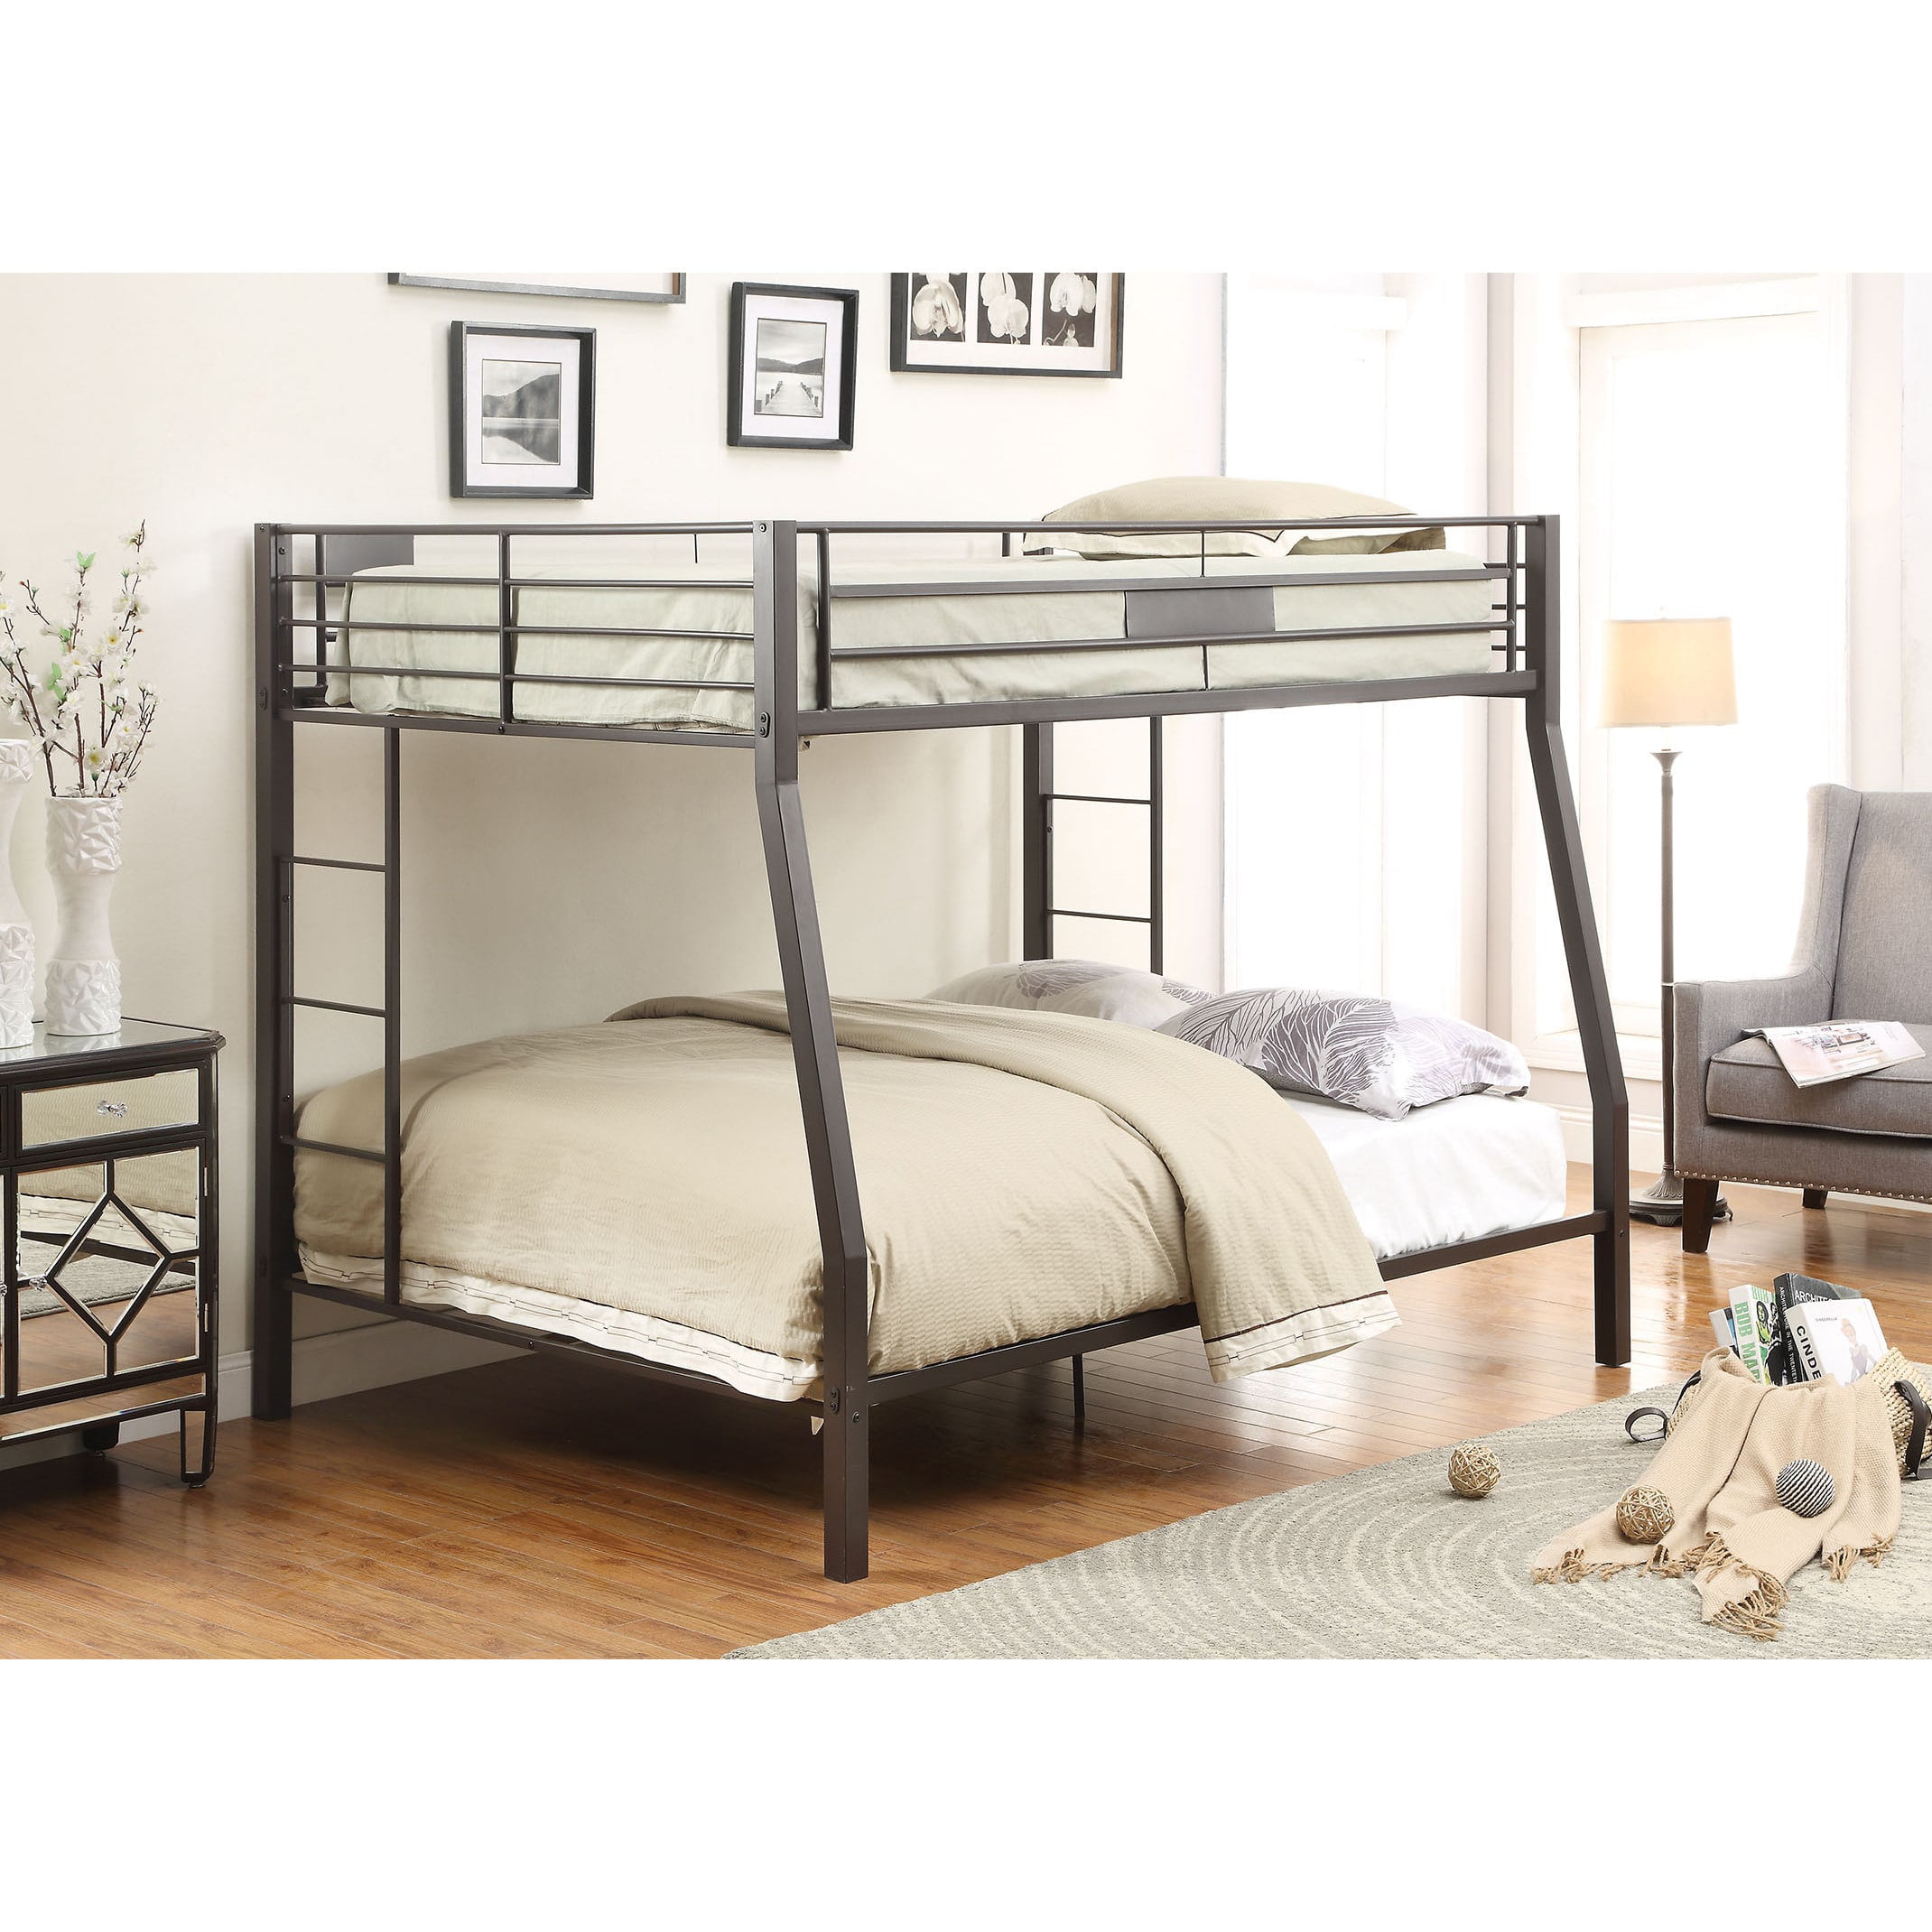 ACME Limbra Full XL over Queen Bunk Bed in Sandy Black, Multiple ...